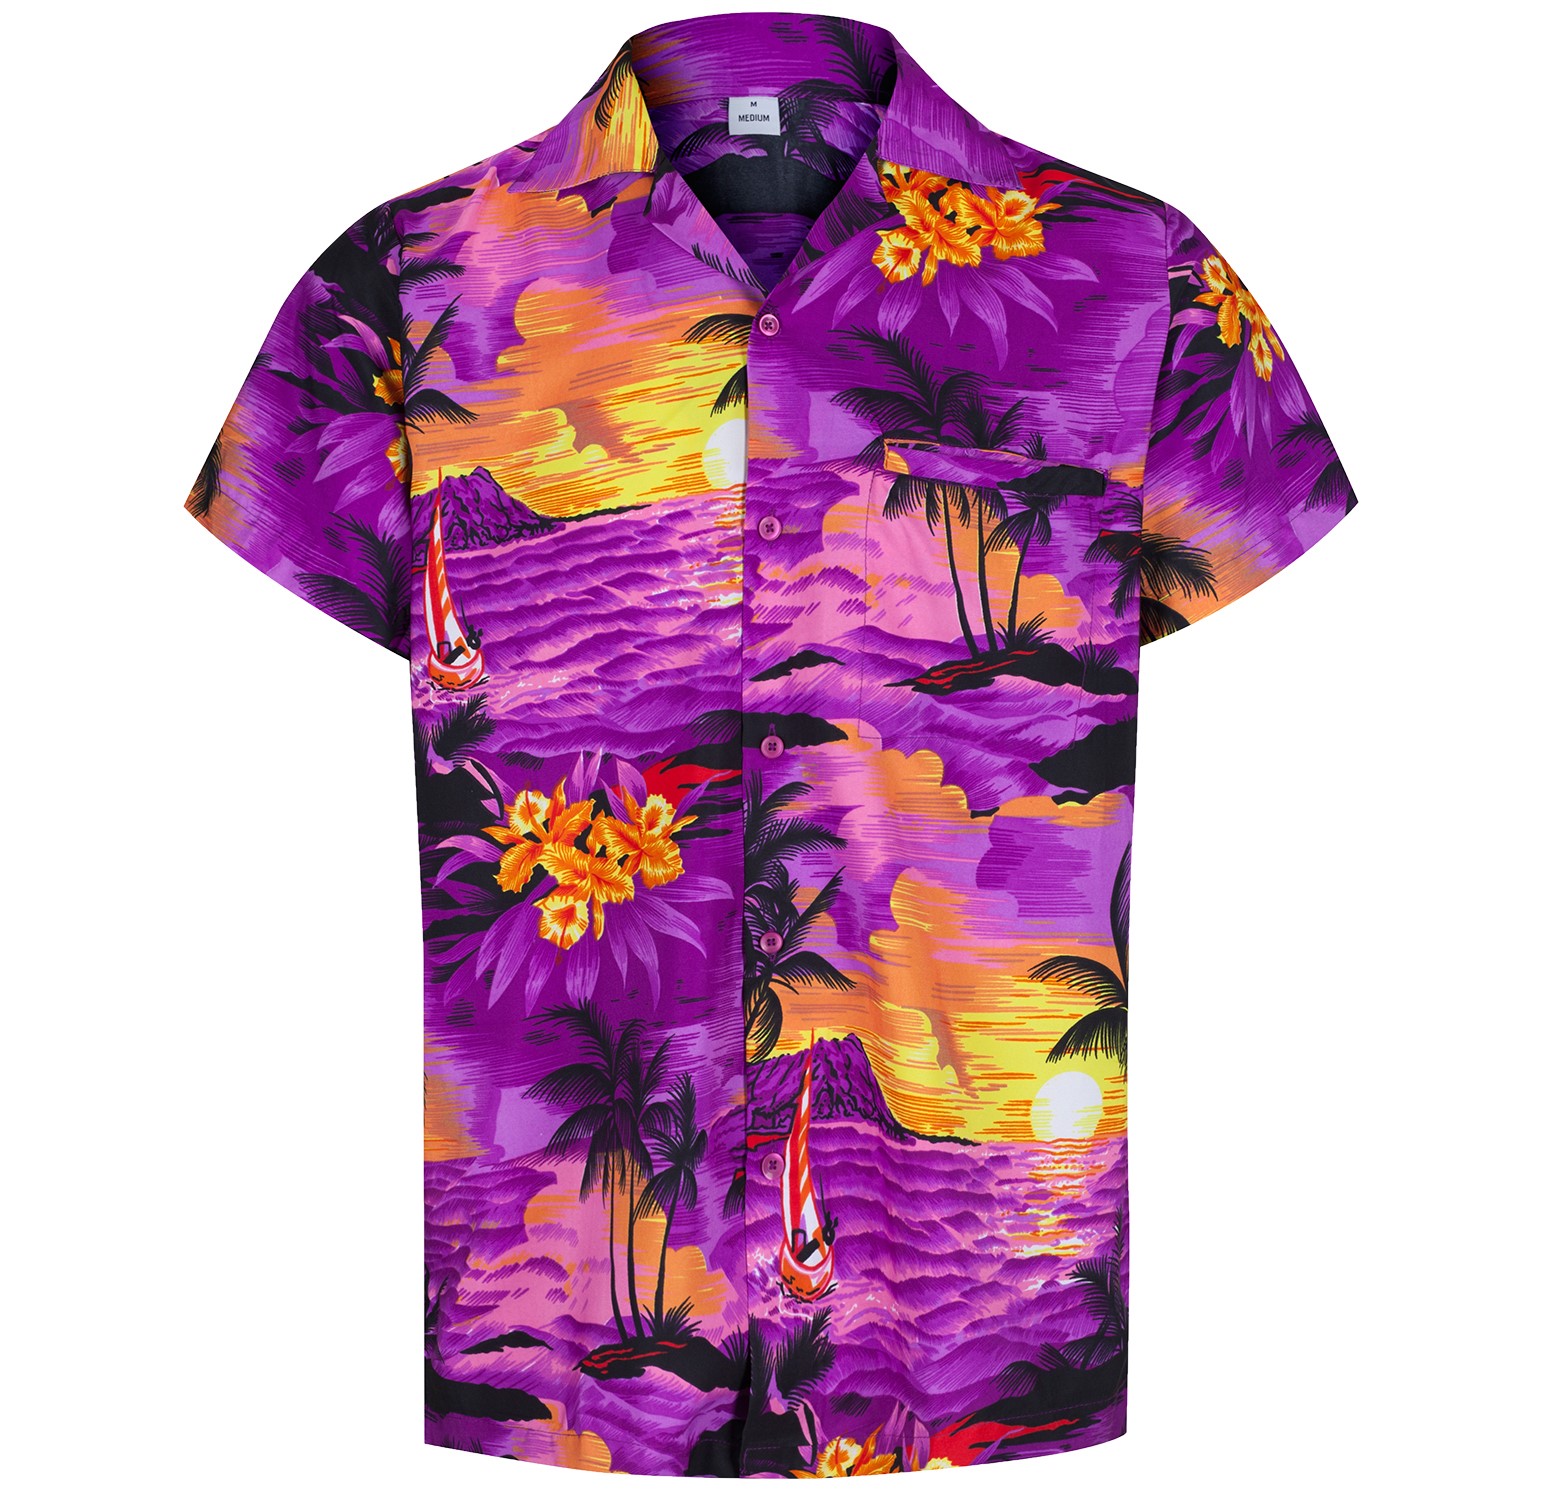 MENS HAWAIIAN SHIRT HIBISCUS THEMED PARTY HOLIDAY BEACH FANCY DRESS STAG DO 